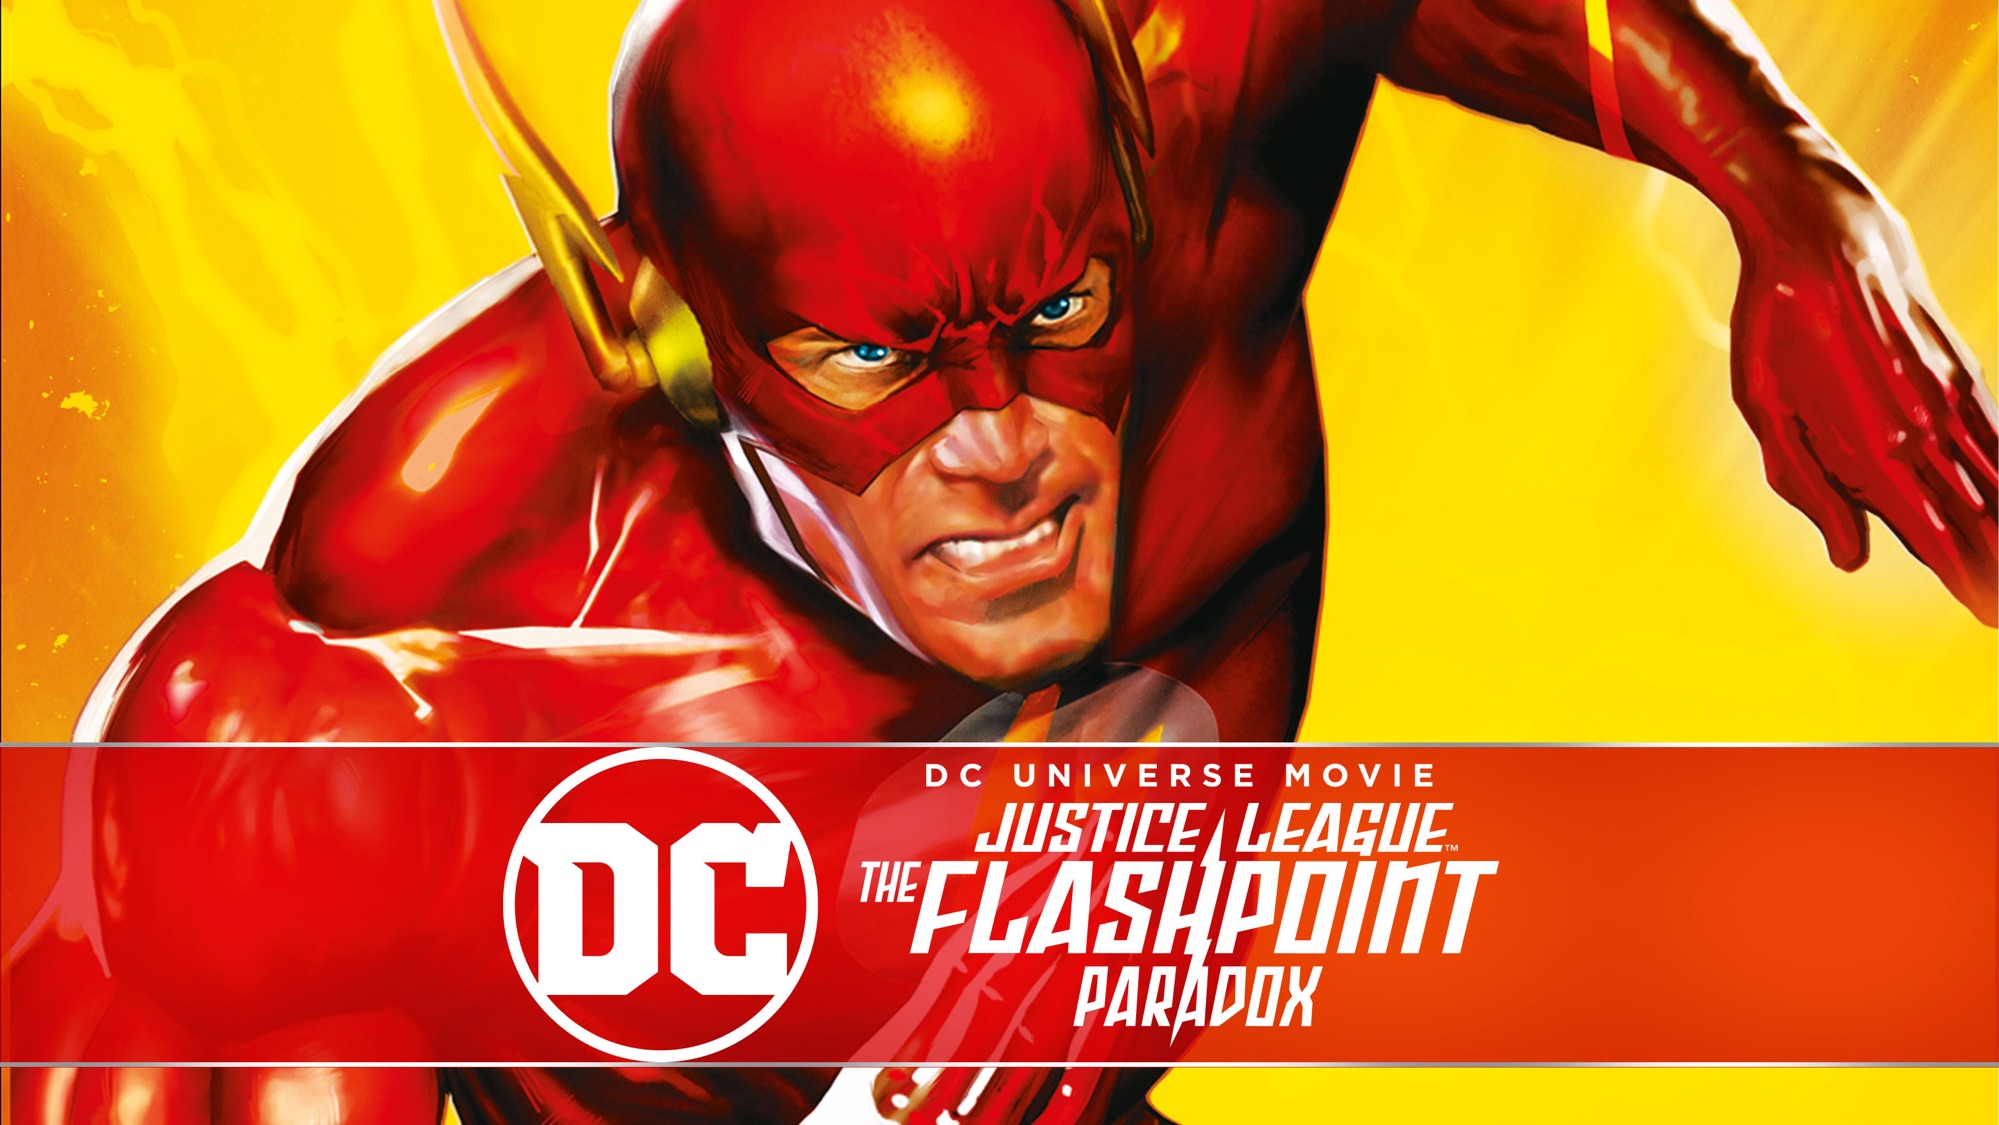 Justice League: The Flashpoint Paradox HD Wallpaper